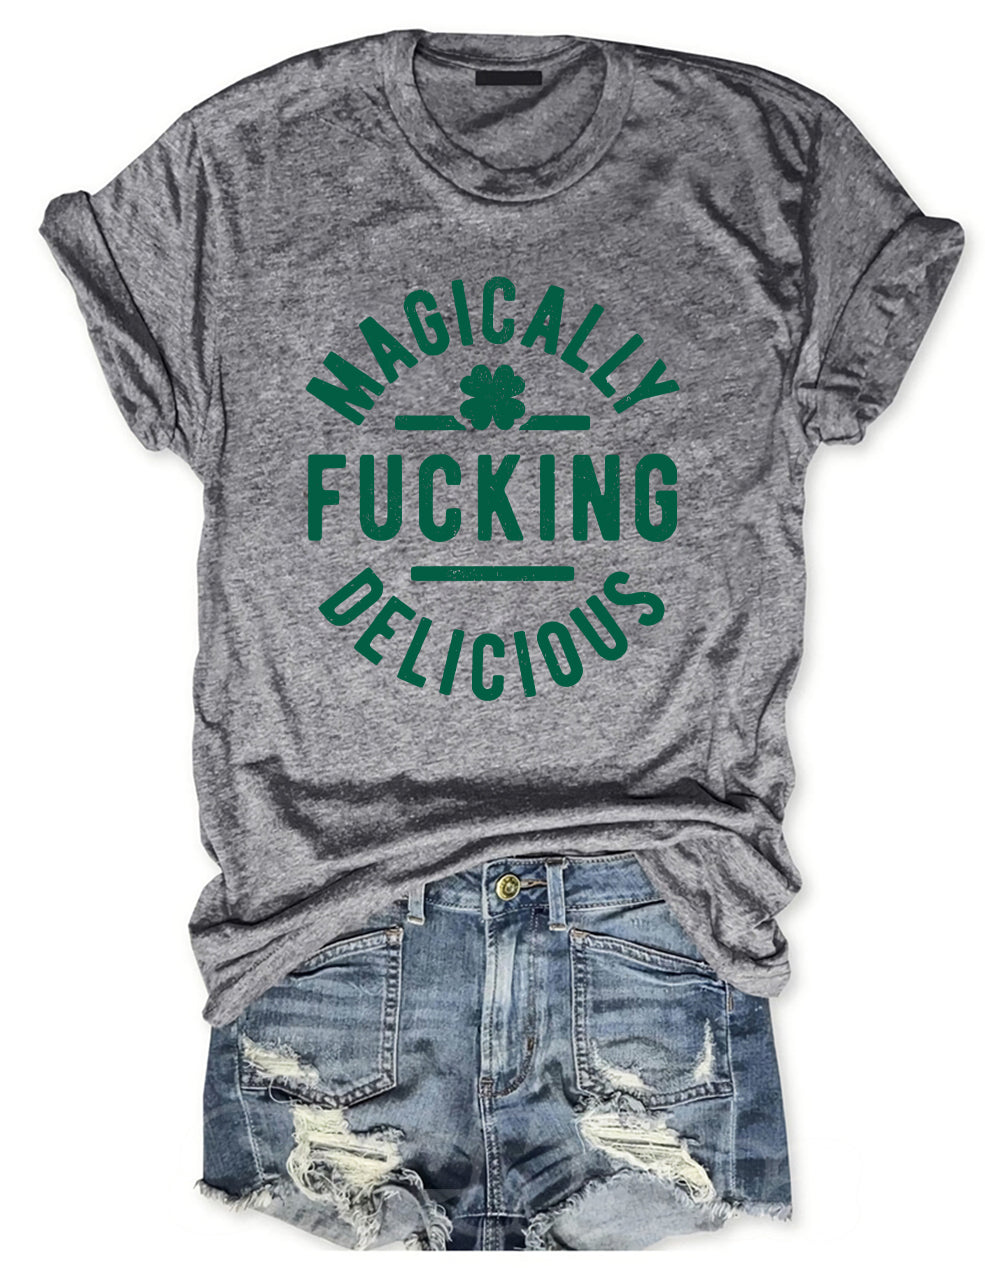 Magically Fucking Delicious T-shirt